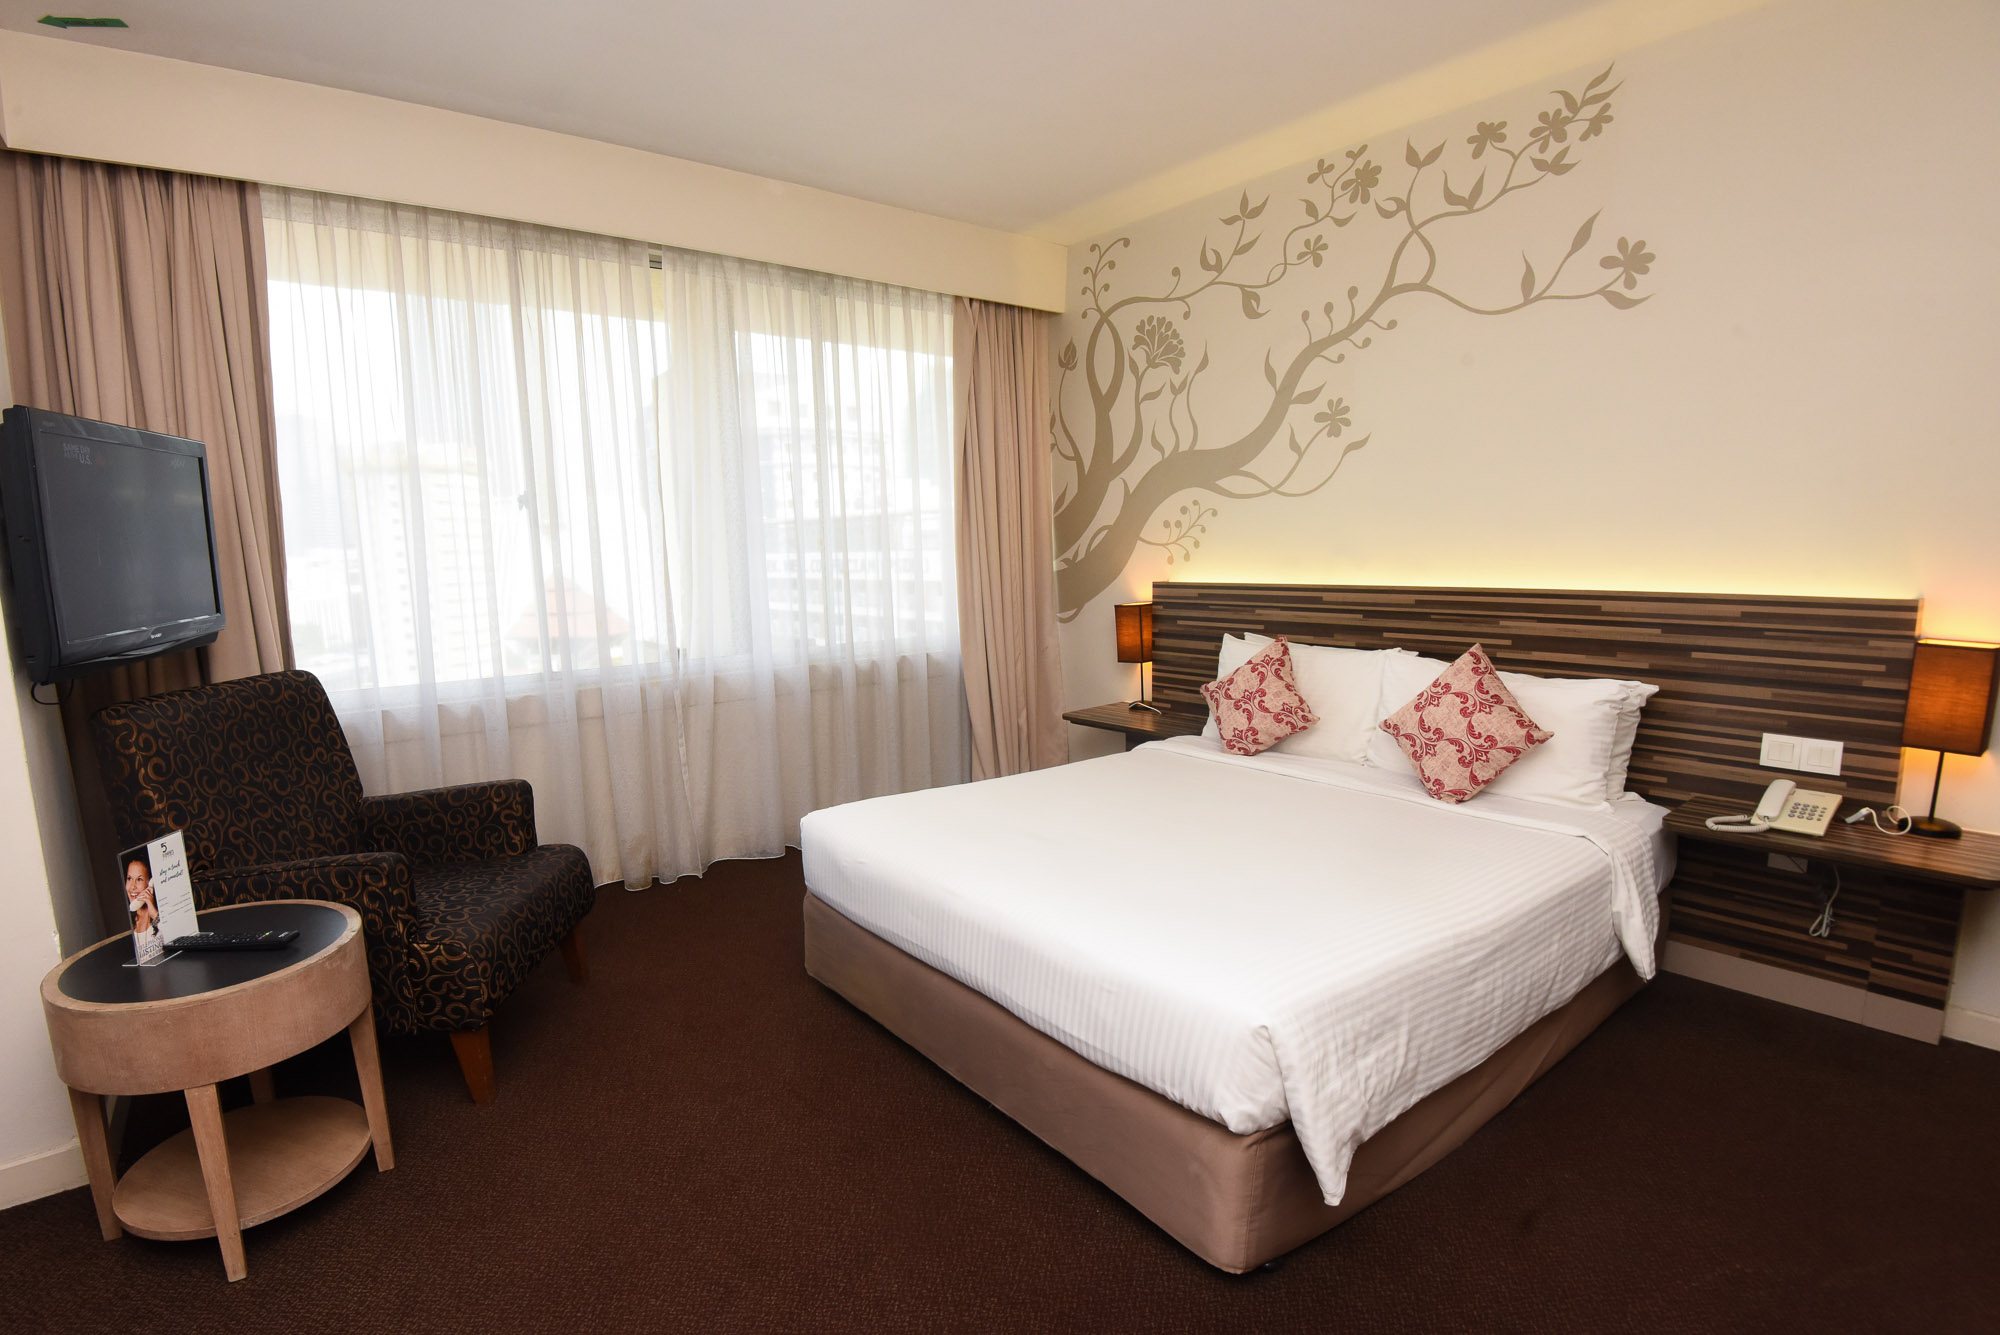 The Deluxe Queen room is perfectly fitted with a comfortable queen bed for couples and travelers alike. The room is equipped with air-conditioning, shower facilities, complimentary WiFi, in-room safe and many others. Dental kit, hair dryer and ironing facilities are available upon request.